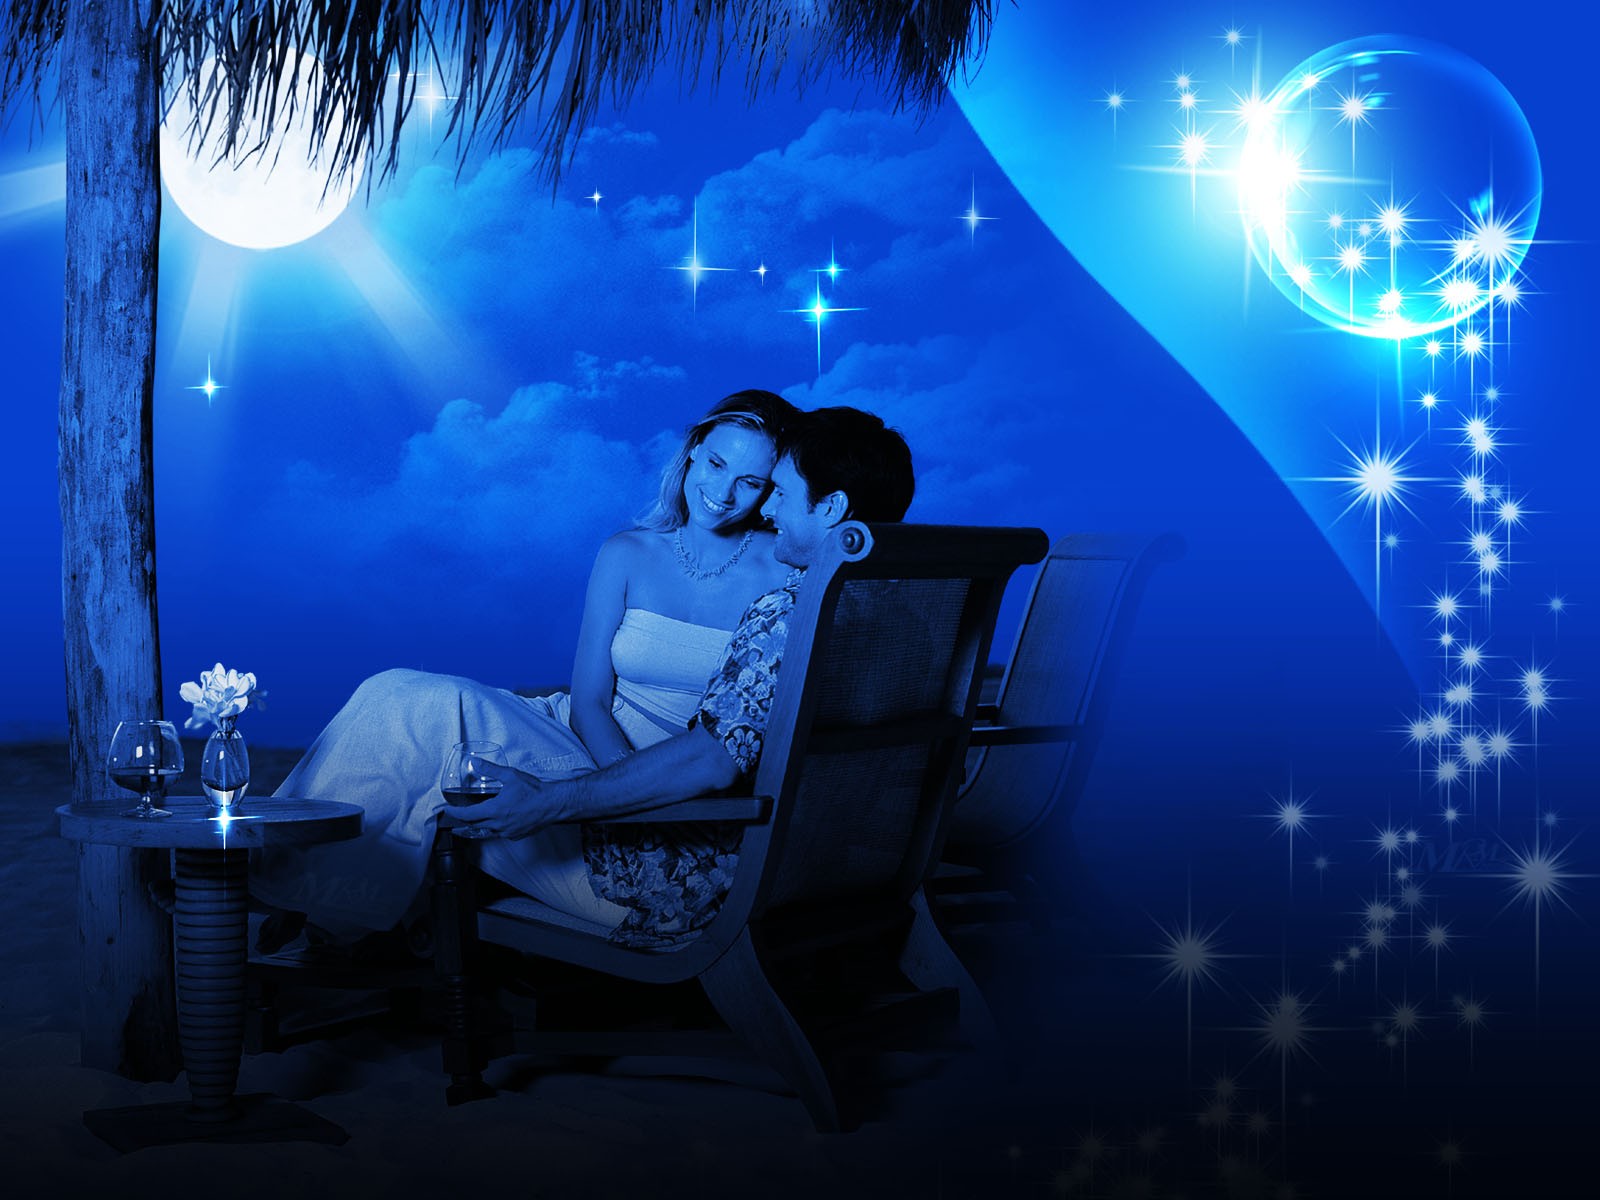 ... romance in moon light - Romantic Love wallpapers for Valentine's Day